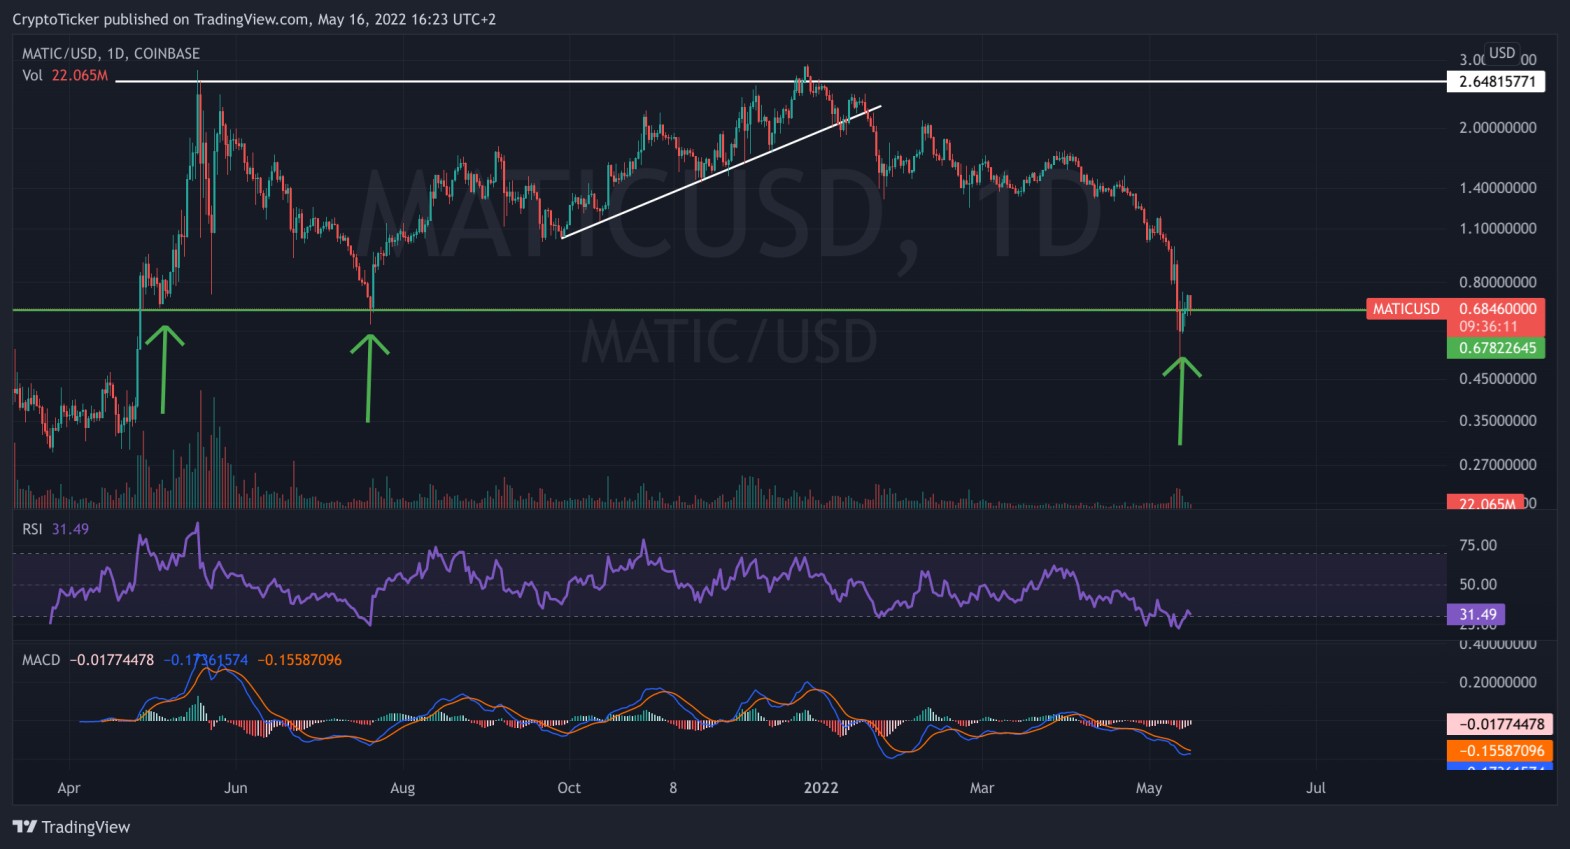 MATIC/USD 1-day chart showing the strong support of MATIC